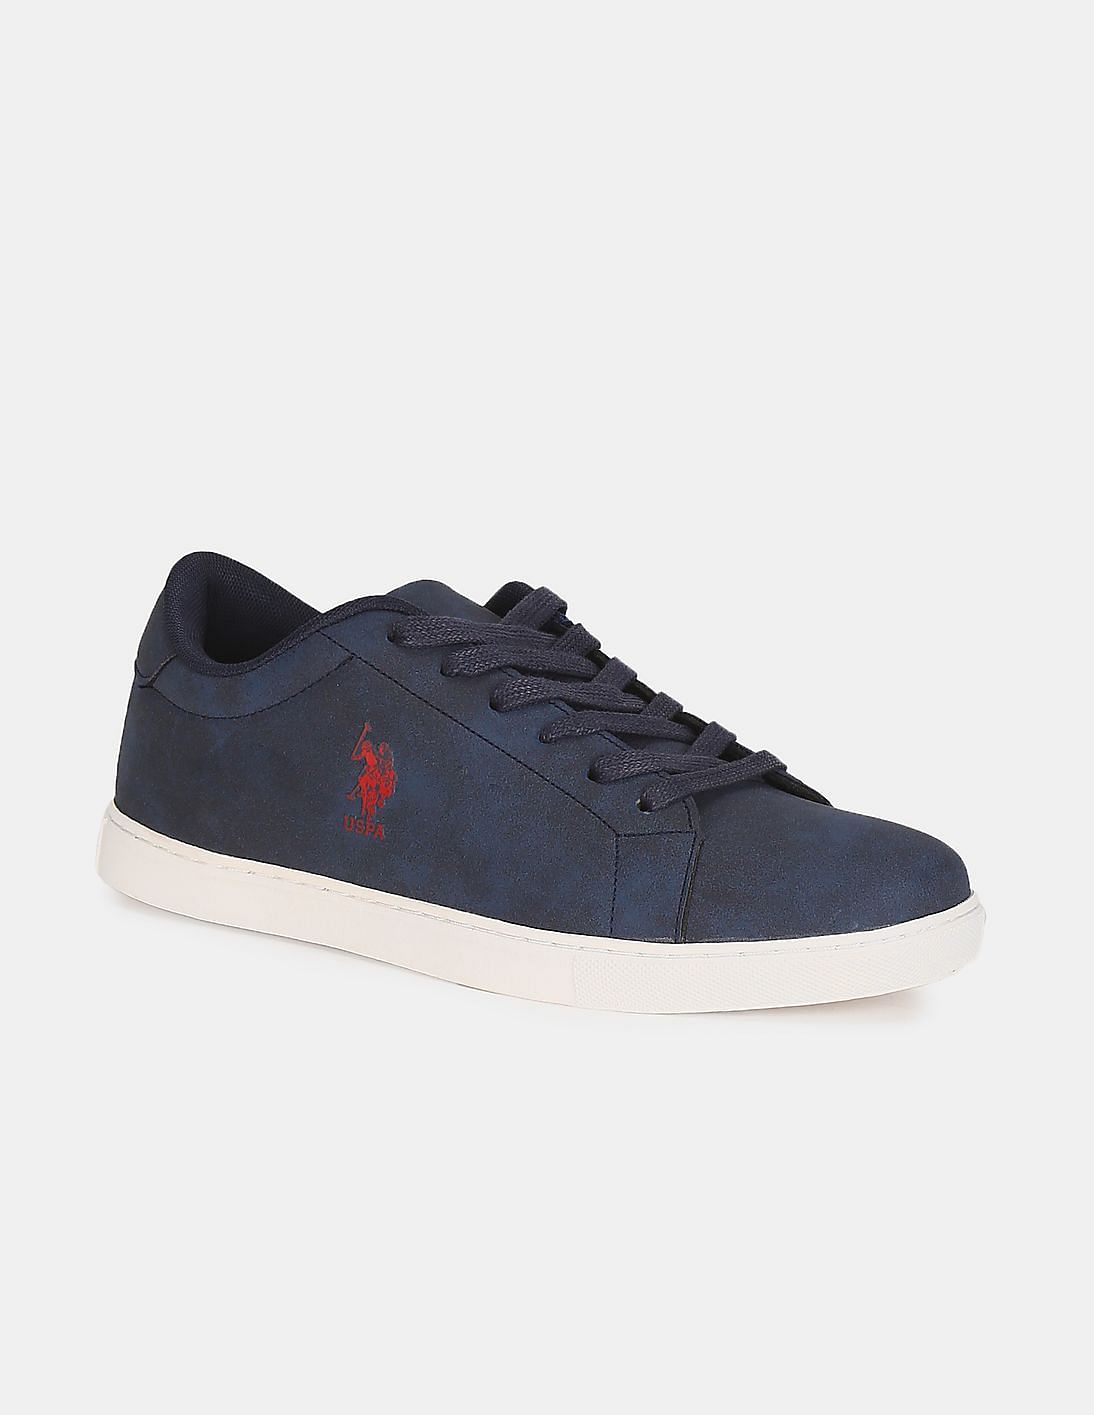 Buy U.S. Polo Assn. Textured Lace Up Gracida Sneakers - NNNOW.com